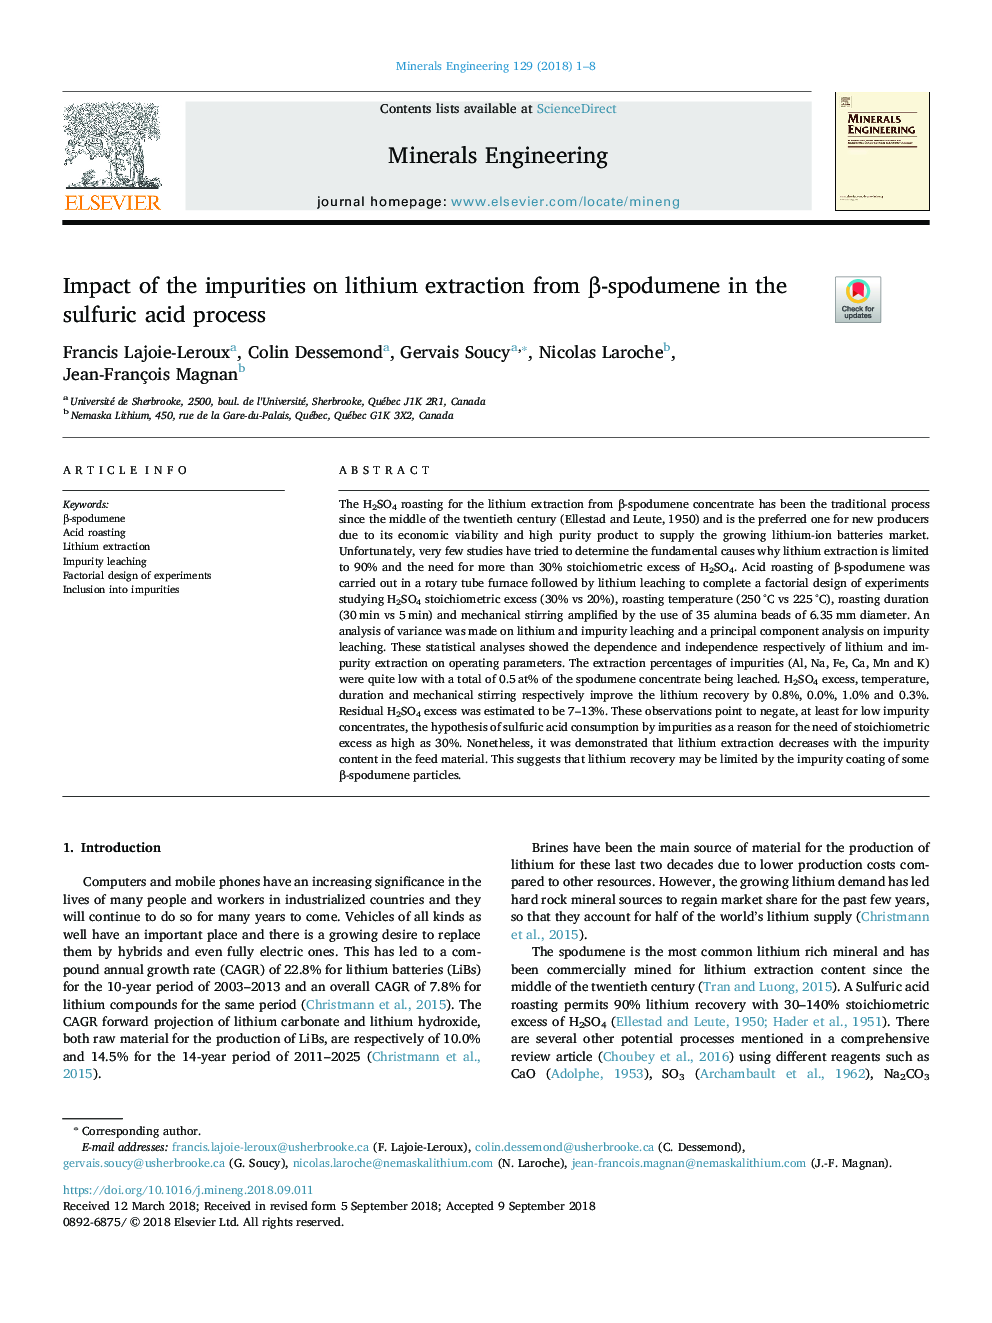 Impact of the impurities on lithium extraction from Î²-spodumene in the sulfuric acid process